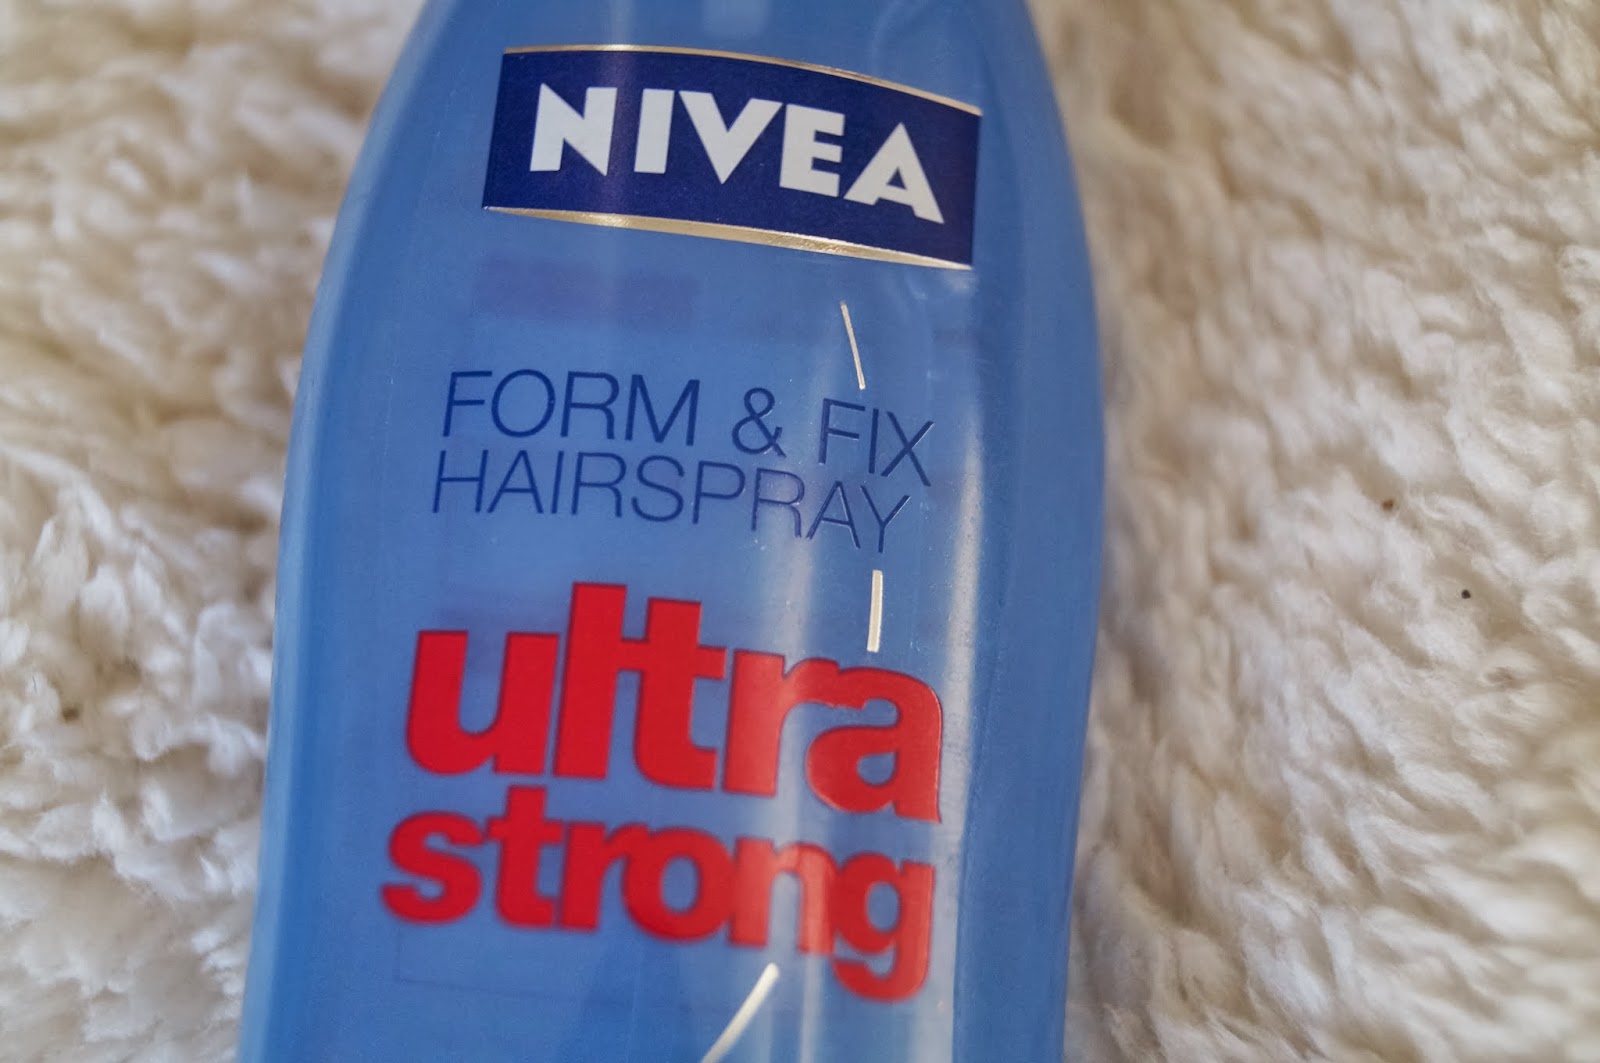 Review: Nivea form & fix spray, ultra strong.